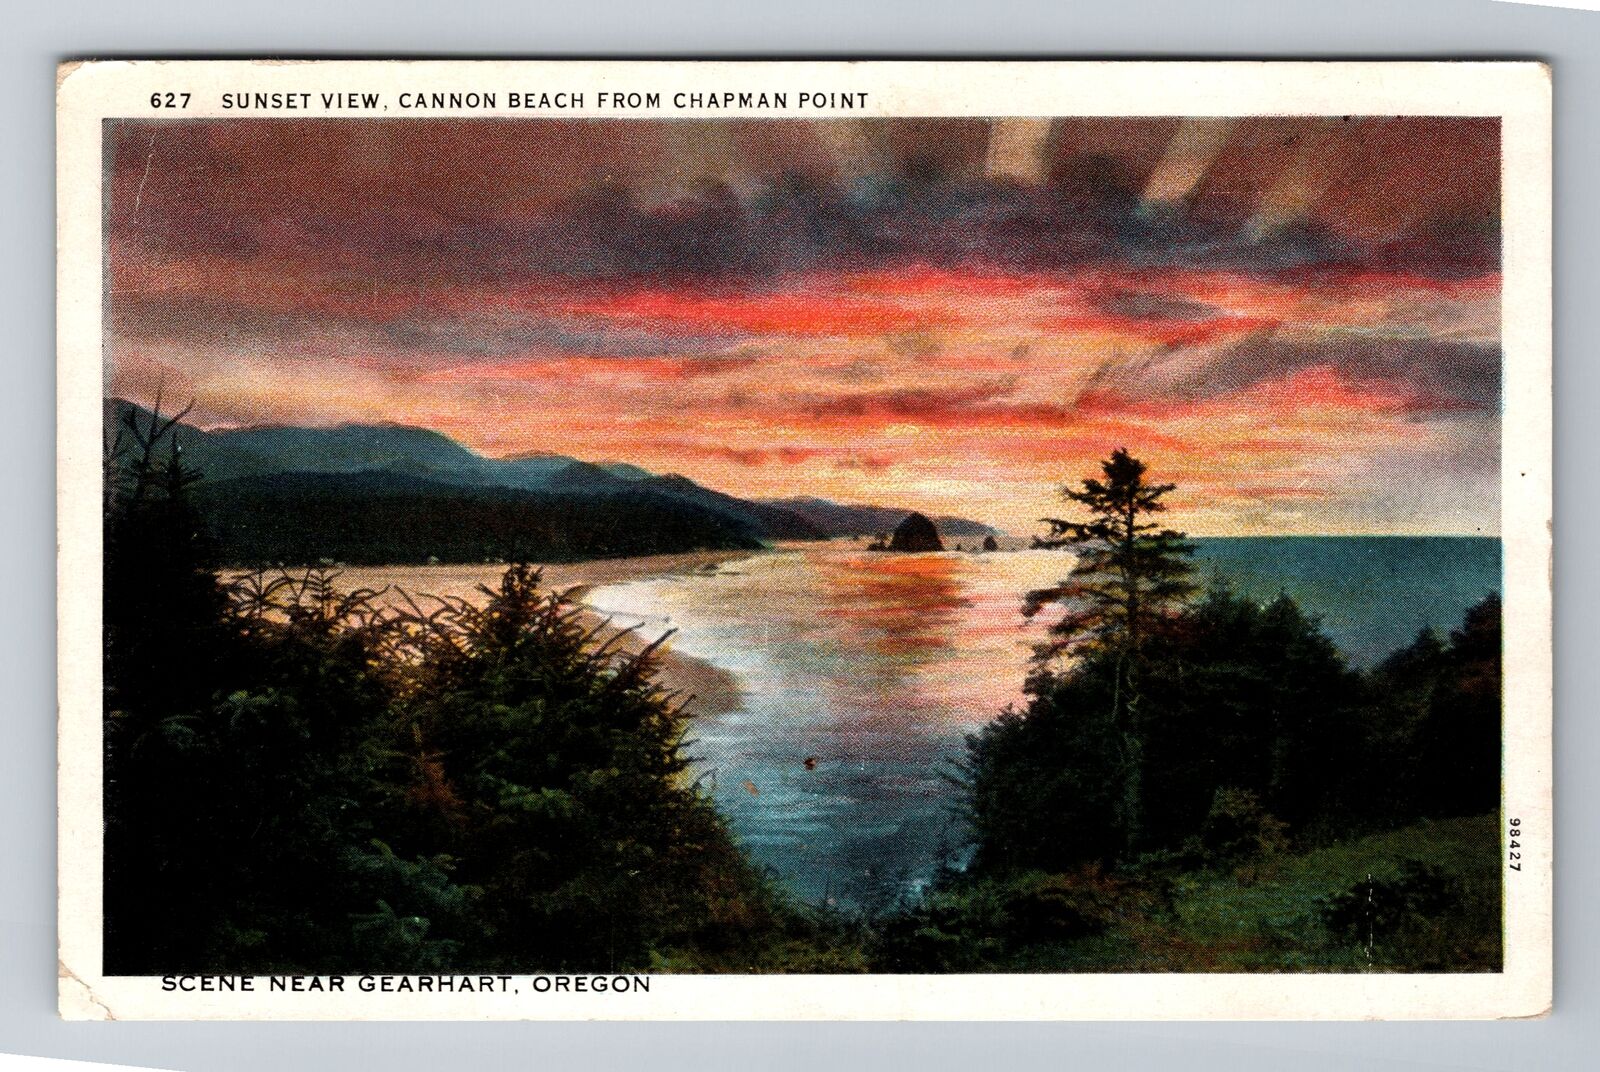 Gearhart OR-Oregon, Sunset View, Cannon Beach, Chapman Point, Vintage Postcard